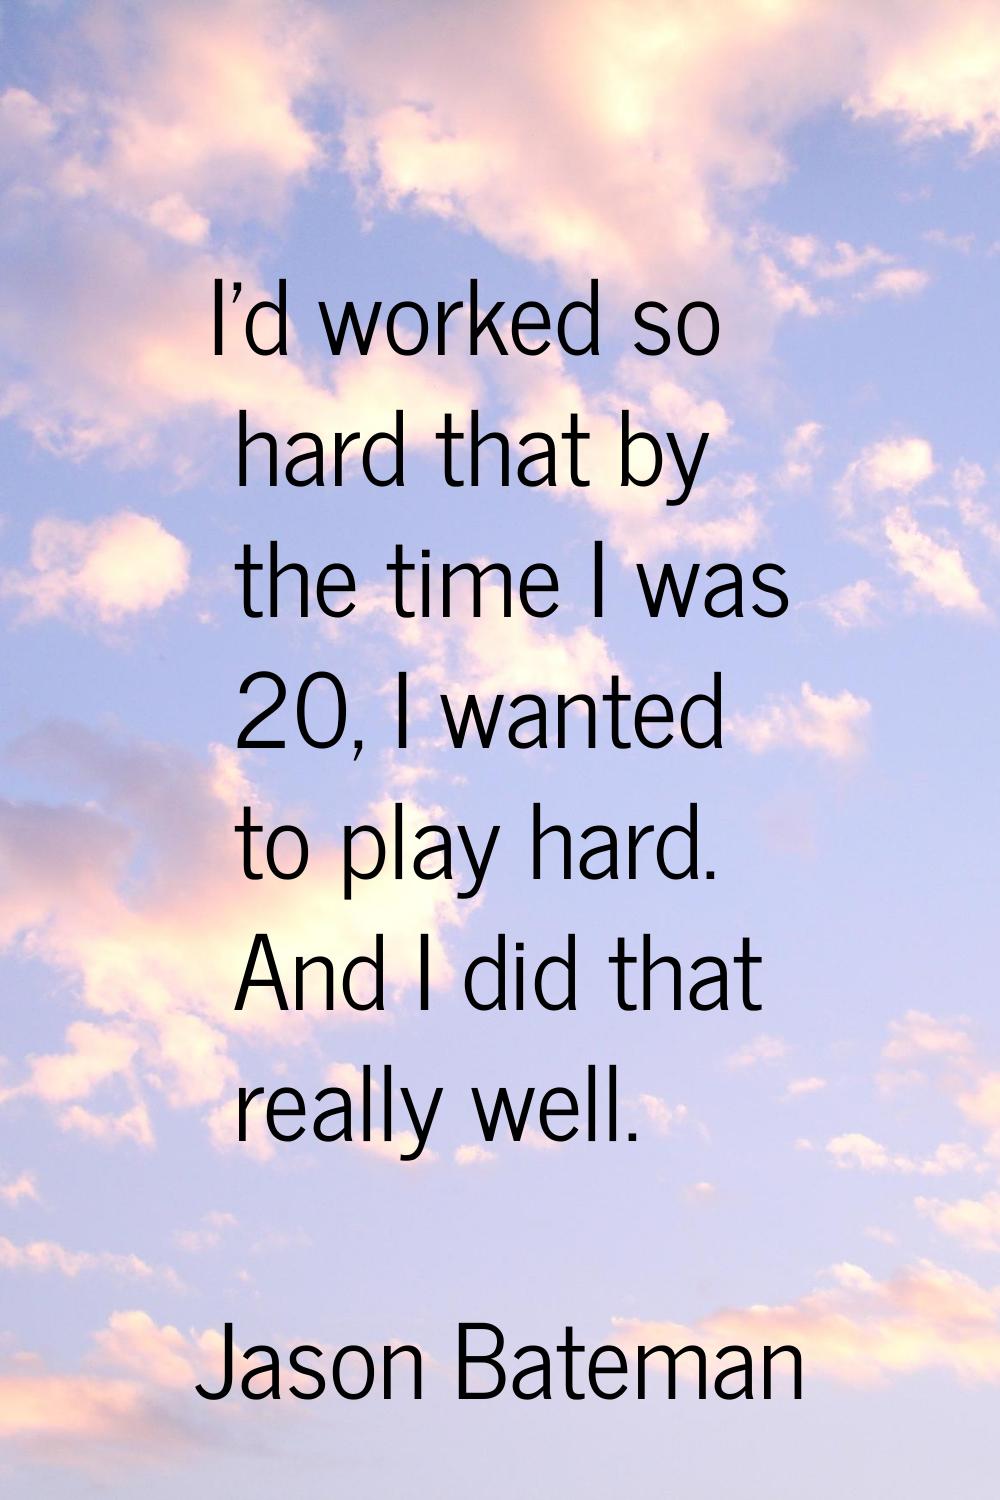 I'd worked so hard that by the time I was 20, I wanted to play hard. And I did that really well.